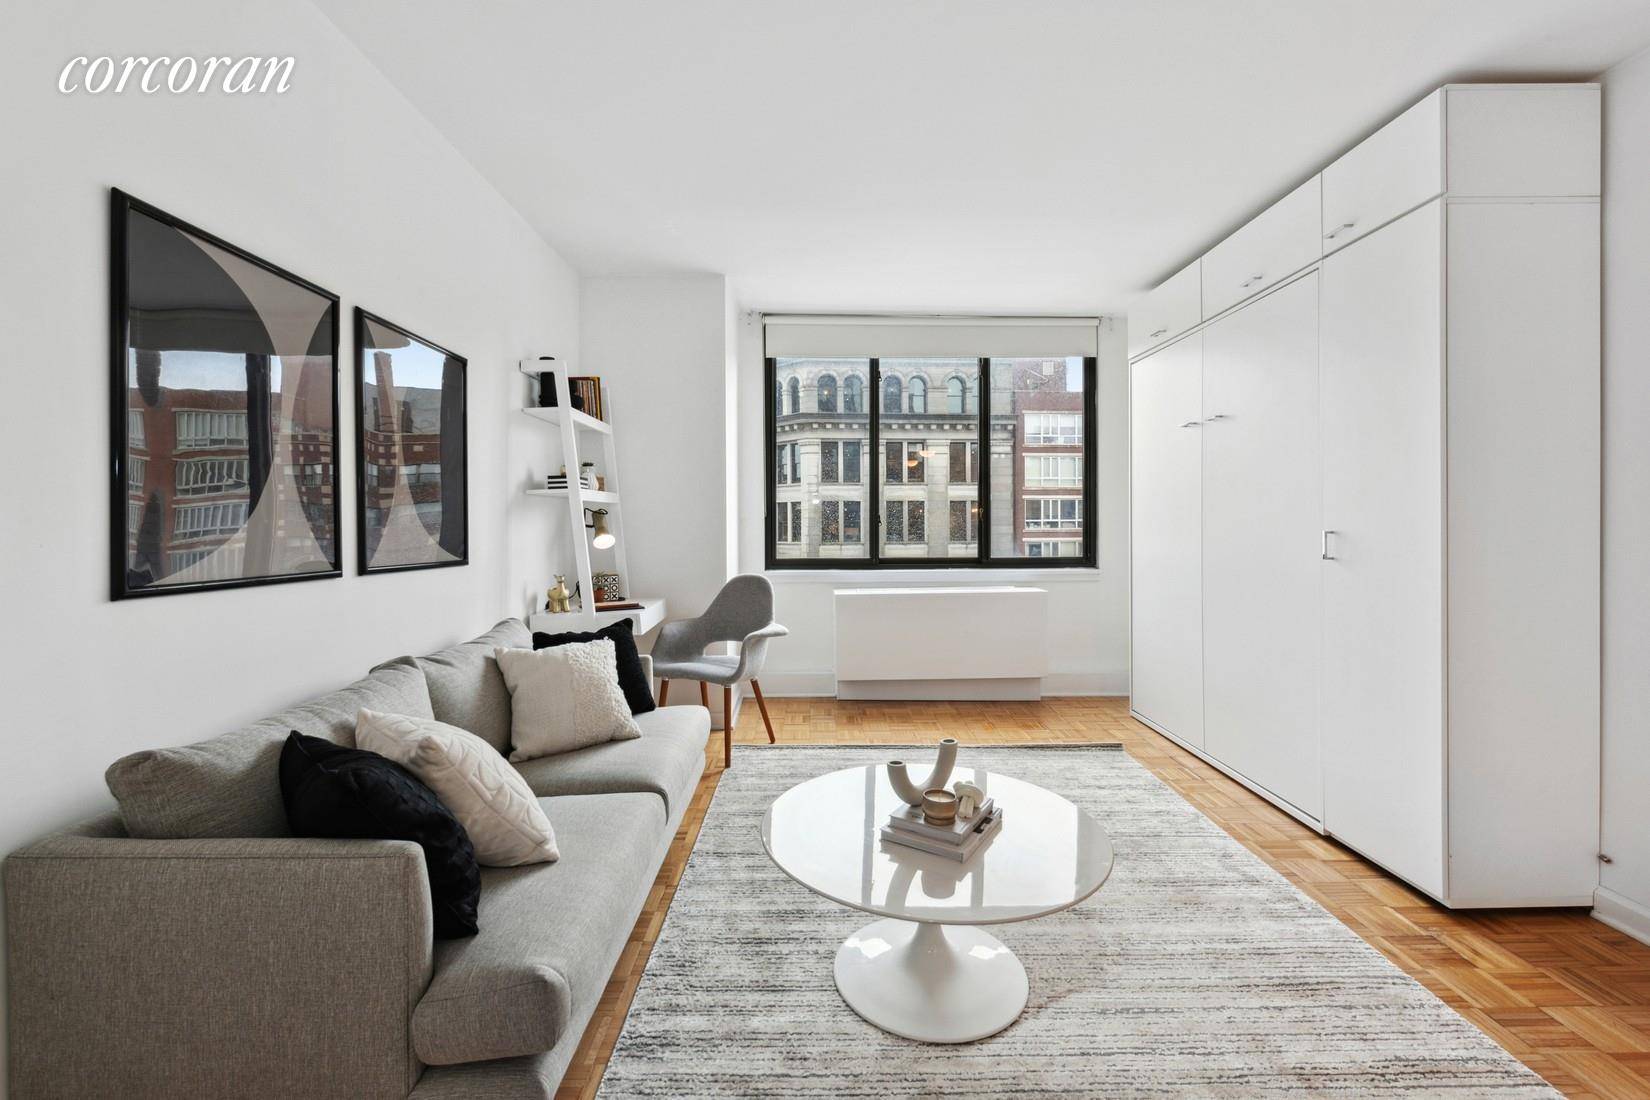 You can have it all in the heart of New York City's hottest neighborhood.